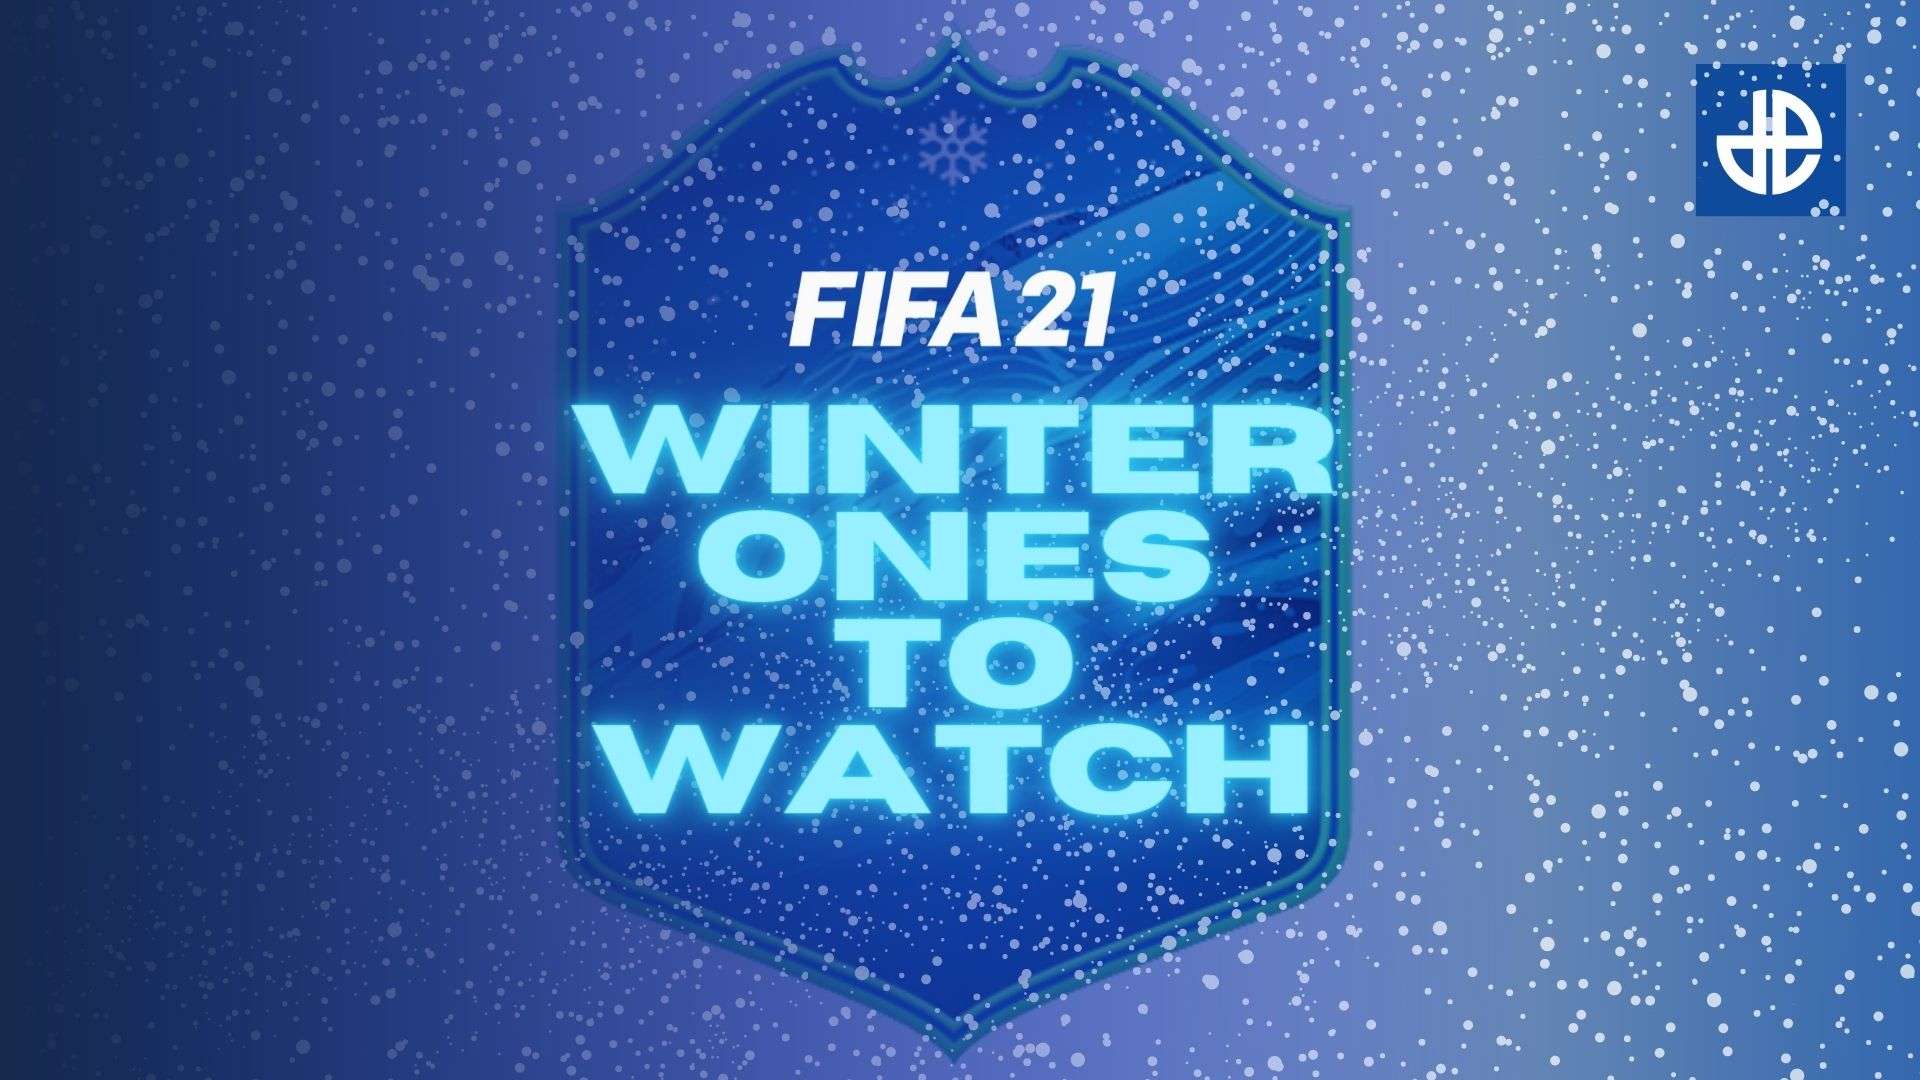 FIFA 21 Ones to Watch predictions